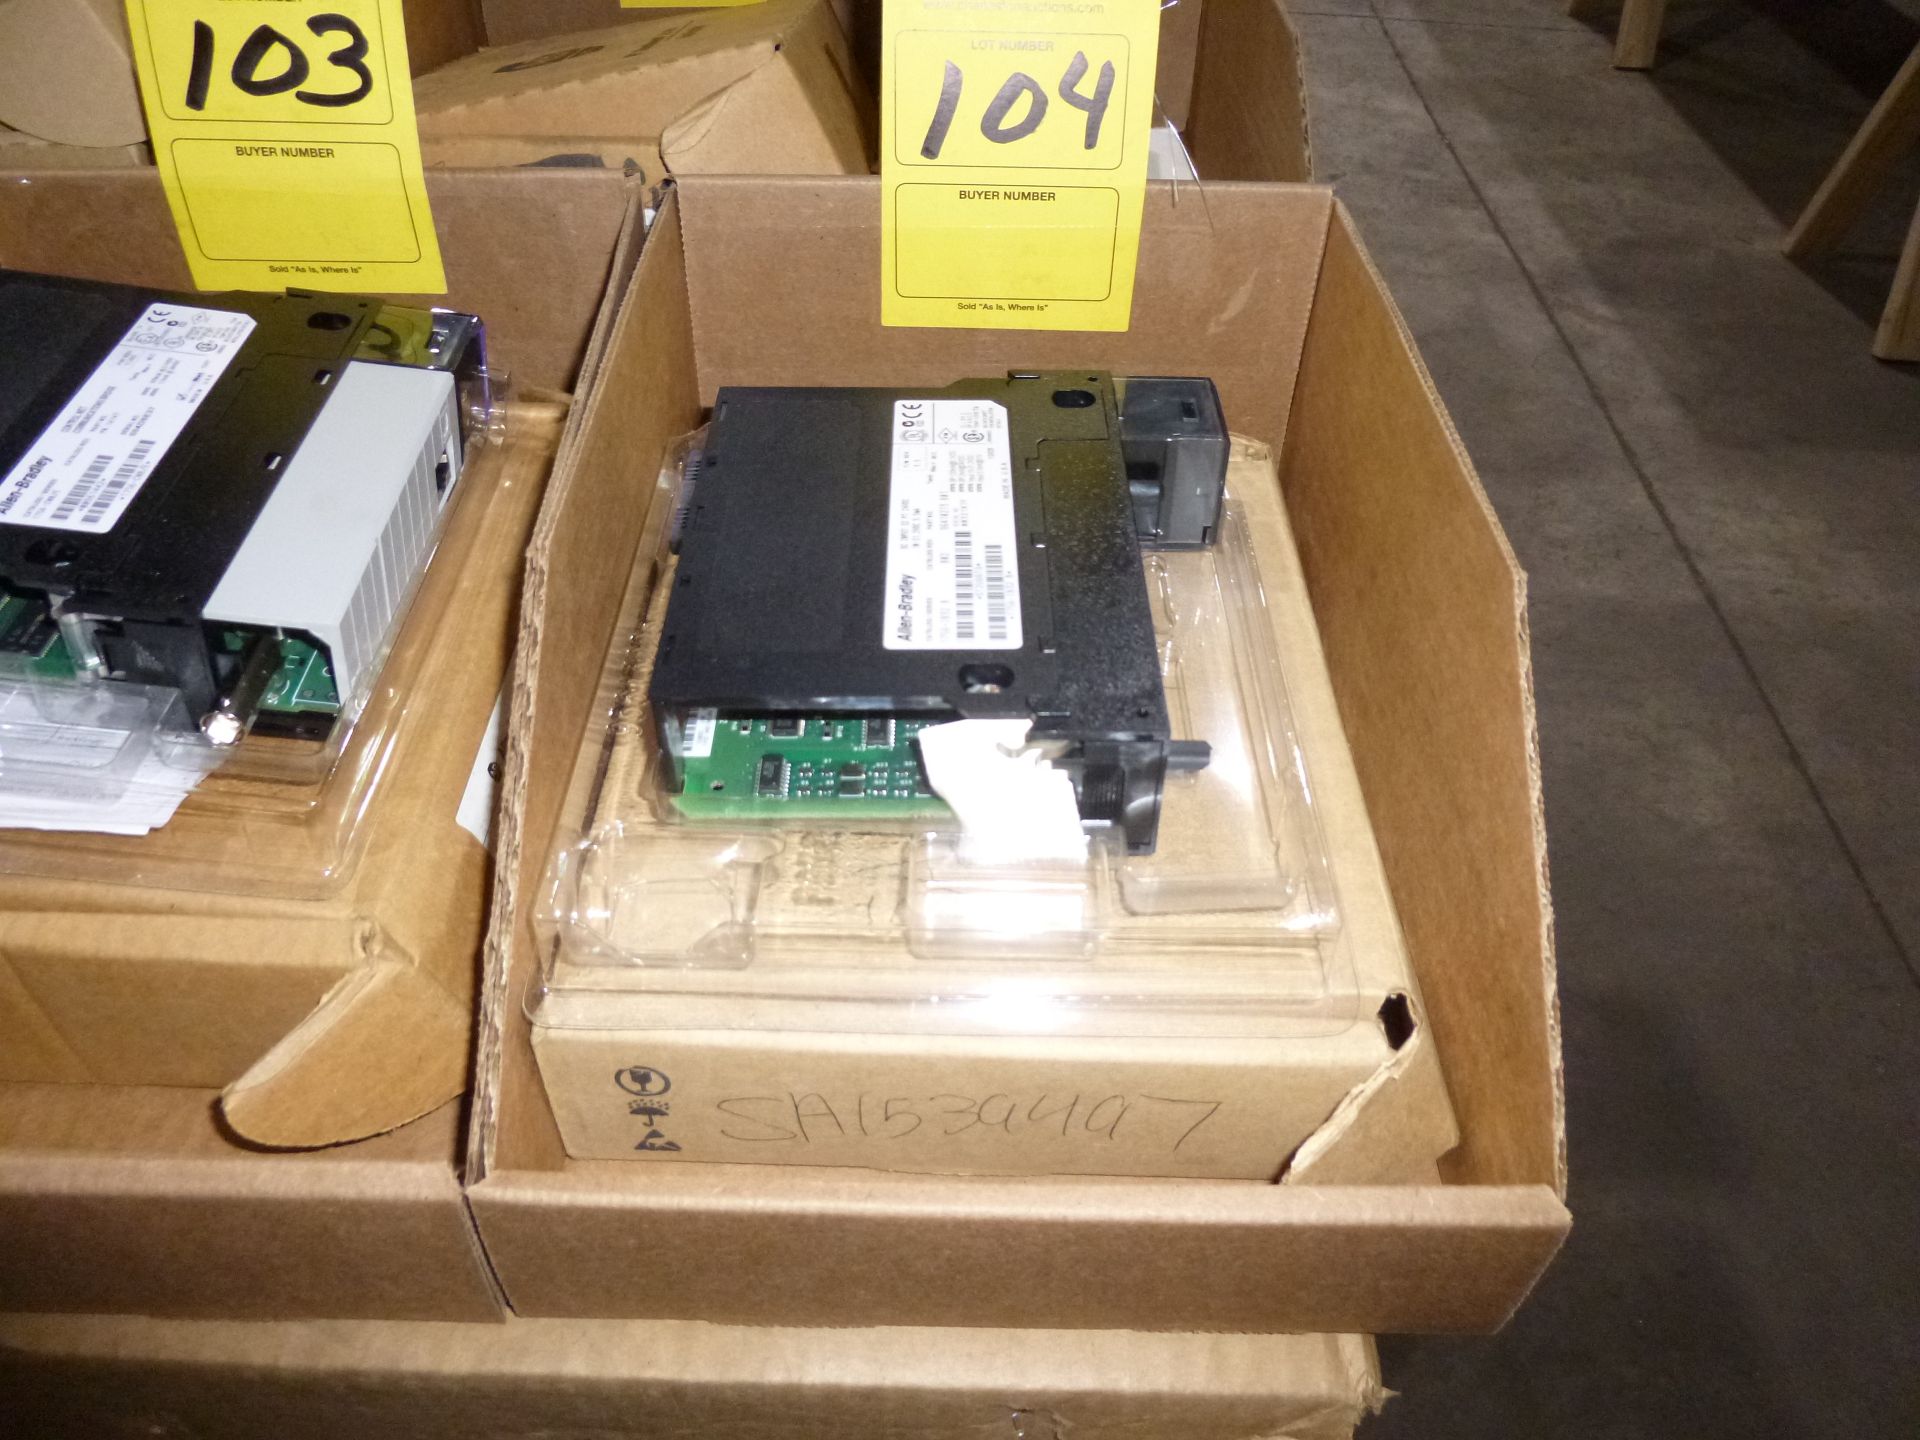 Allen Bradley model 1756IB32, as always with Brolyn LLC auctions, all lots can be picked up from